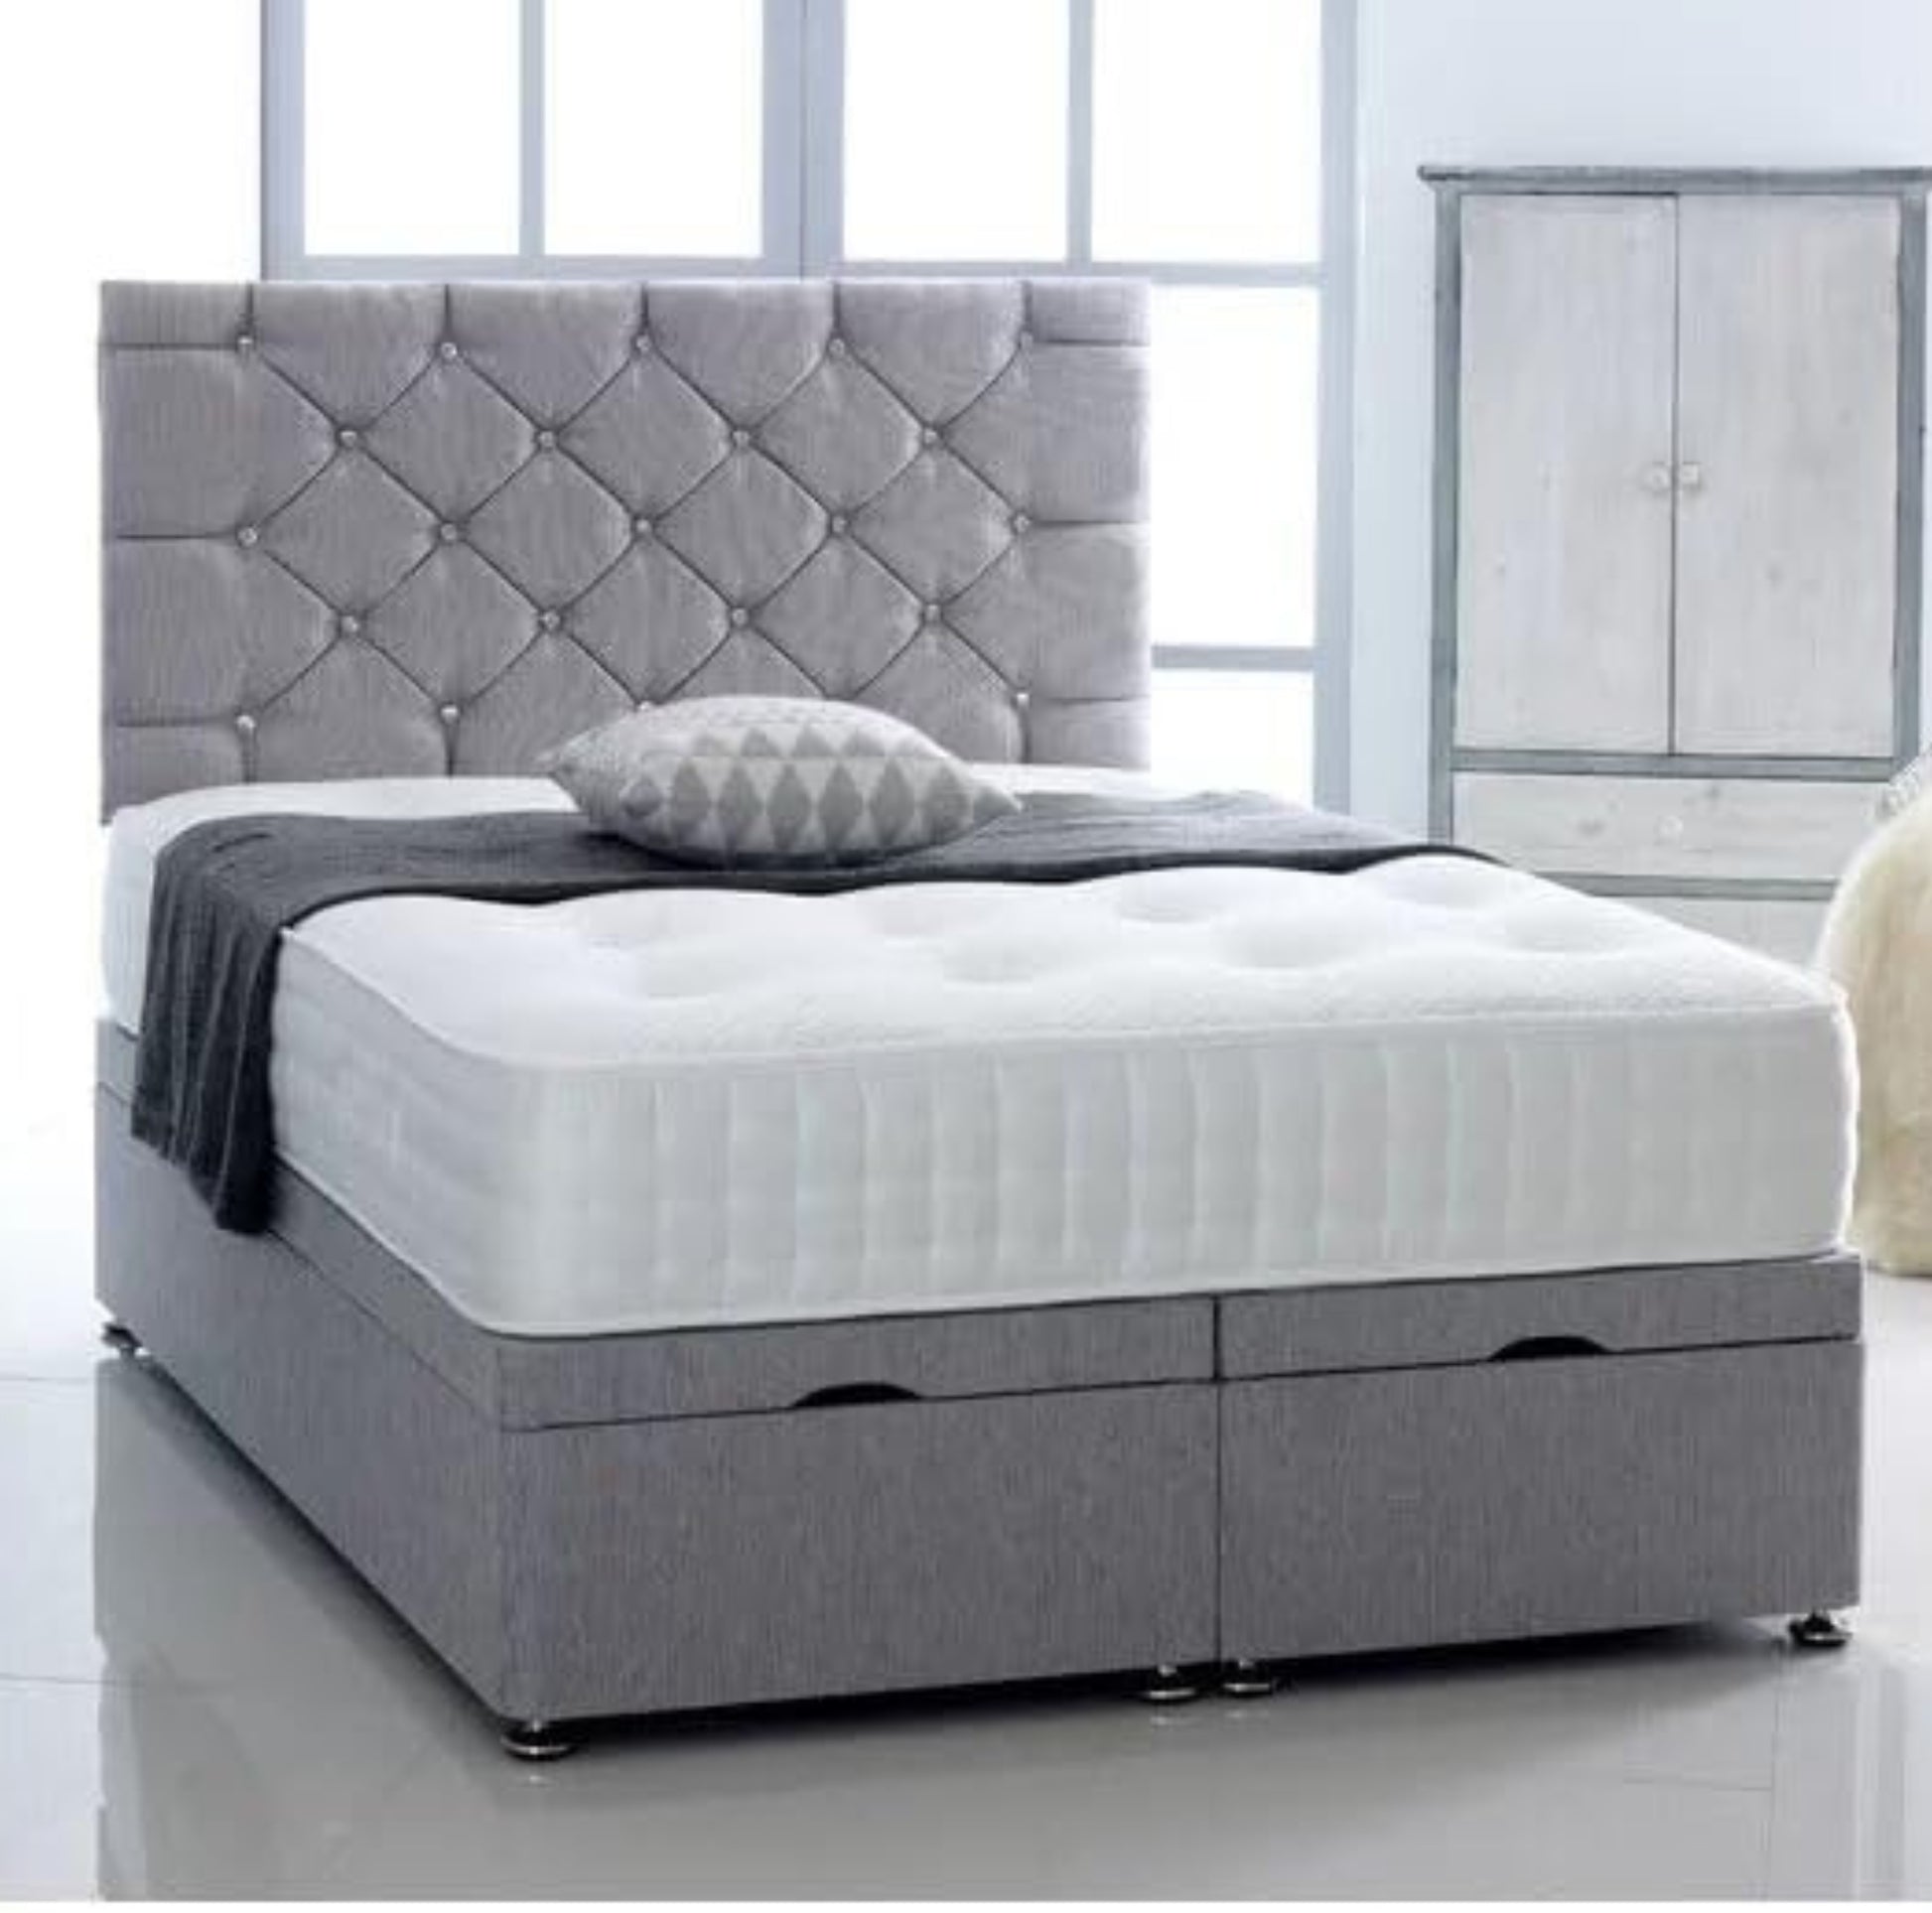 Ottoman Divan Bed, Cube Design Headboard, Ottoman Storage, Handcrafted, British Bed Store, Velvet, Linen, and Crushed Velvet, Single, Double, King, and Super King Sizes, Gas Lift Mechanism, Comfort and Support, Bed shop near me, bed store in uk, customizable fabric options